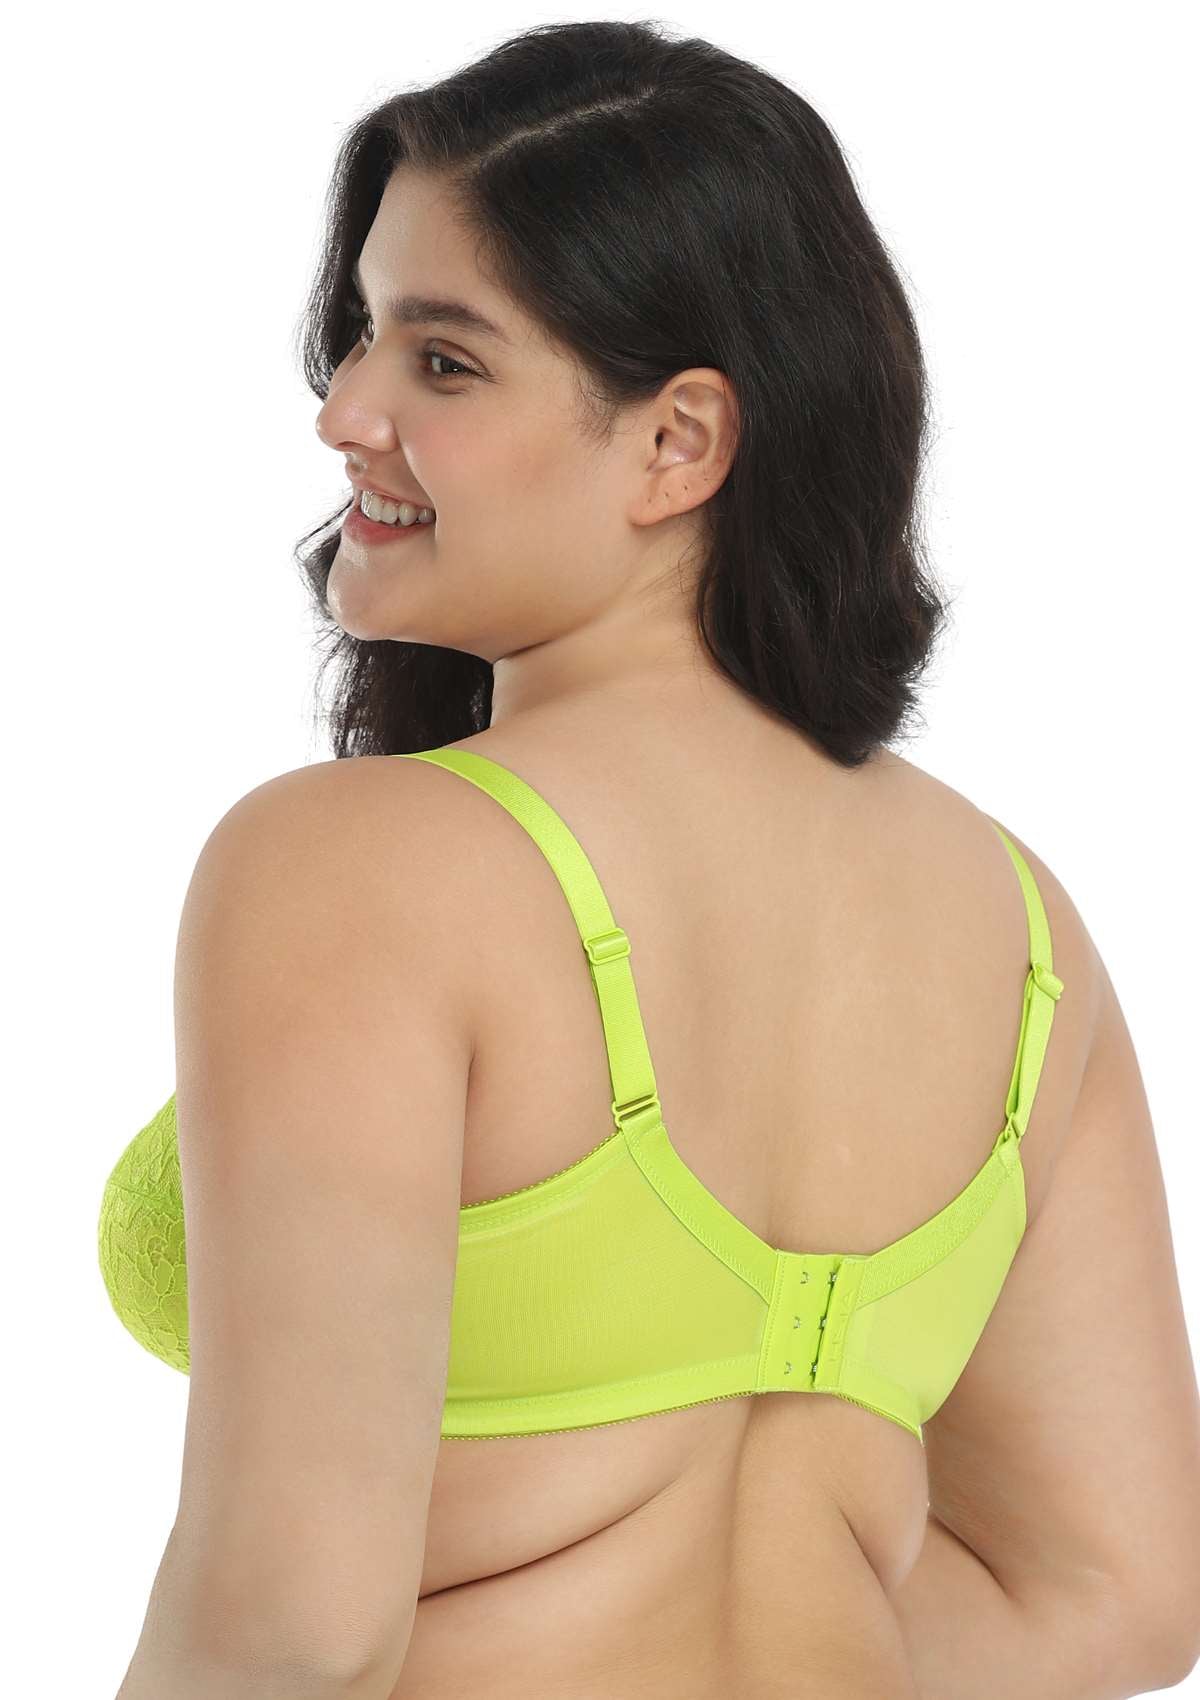 HSIA Enchante Full Cup Minimizing Bra: Supportive Unlined Lace Bra - Lime Green / 40 / I